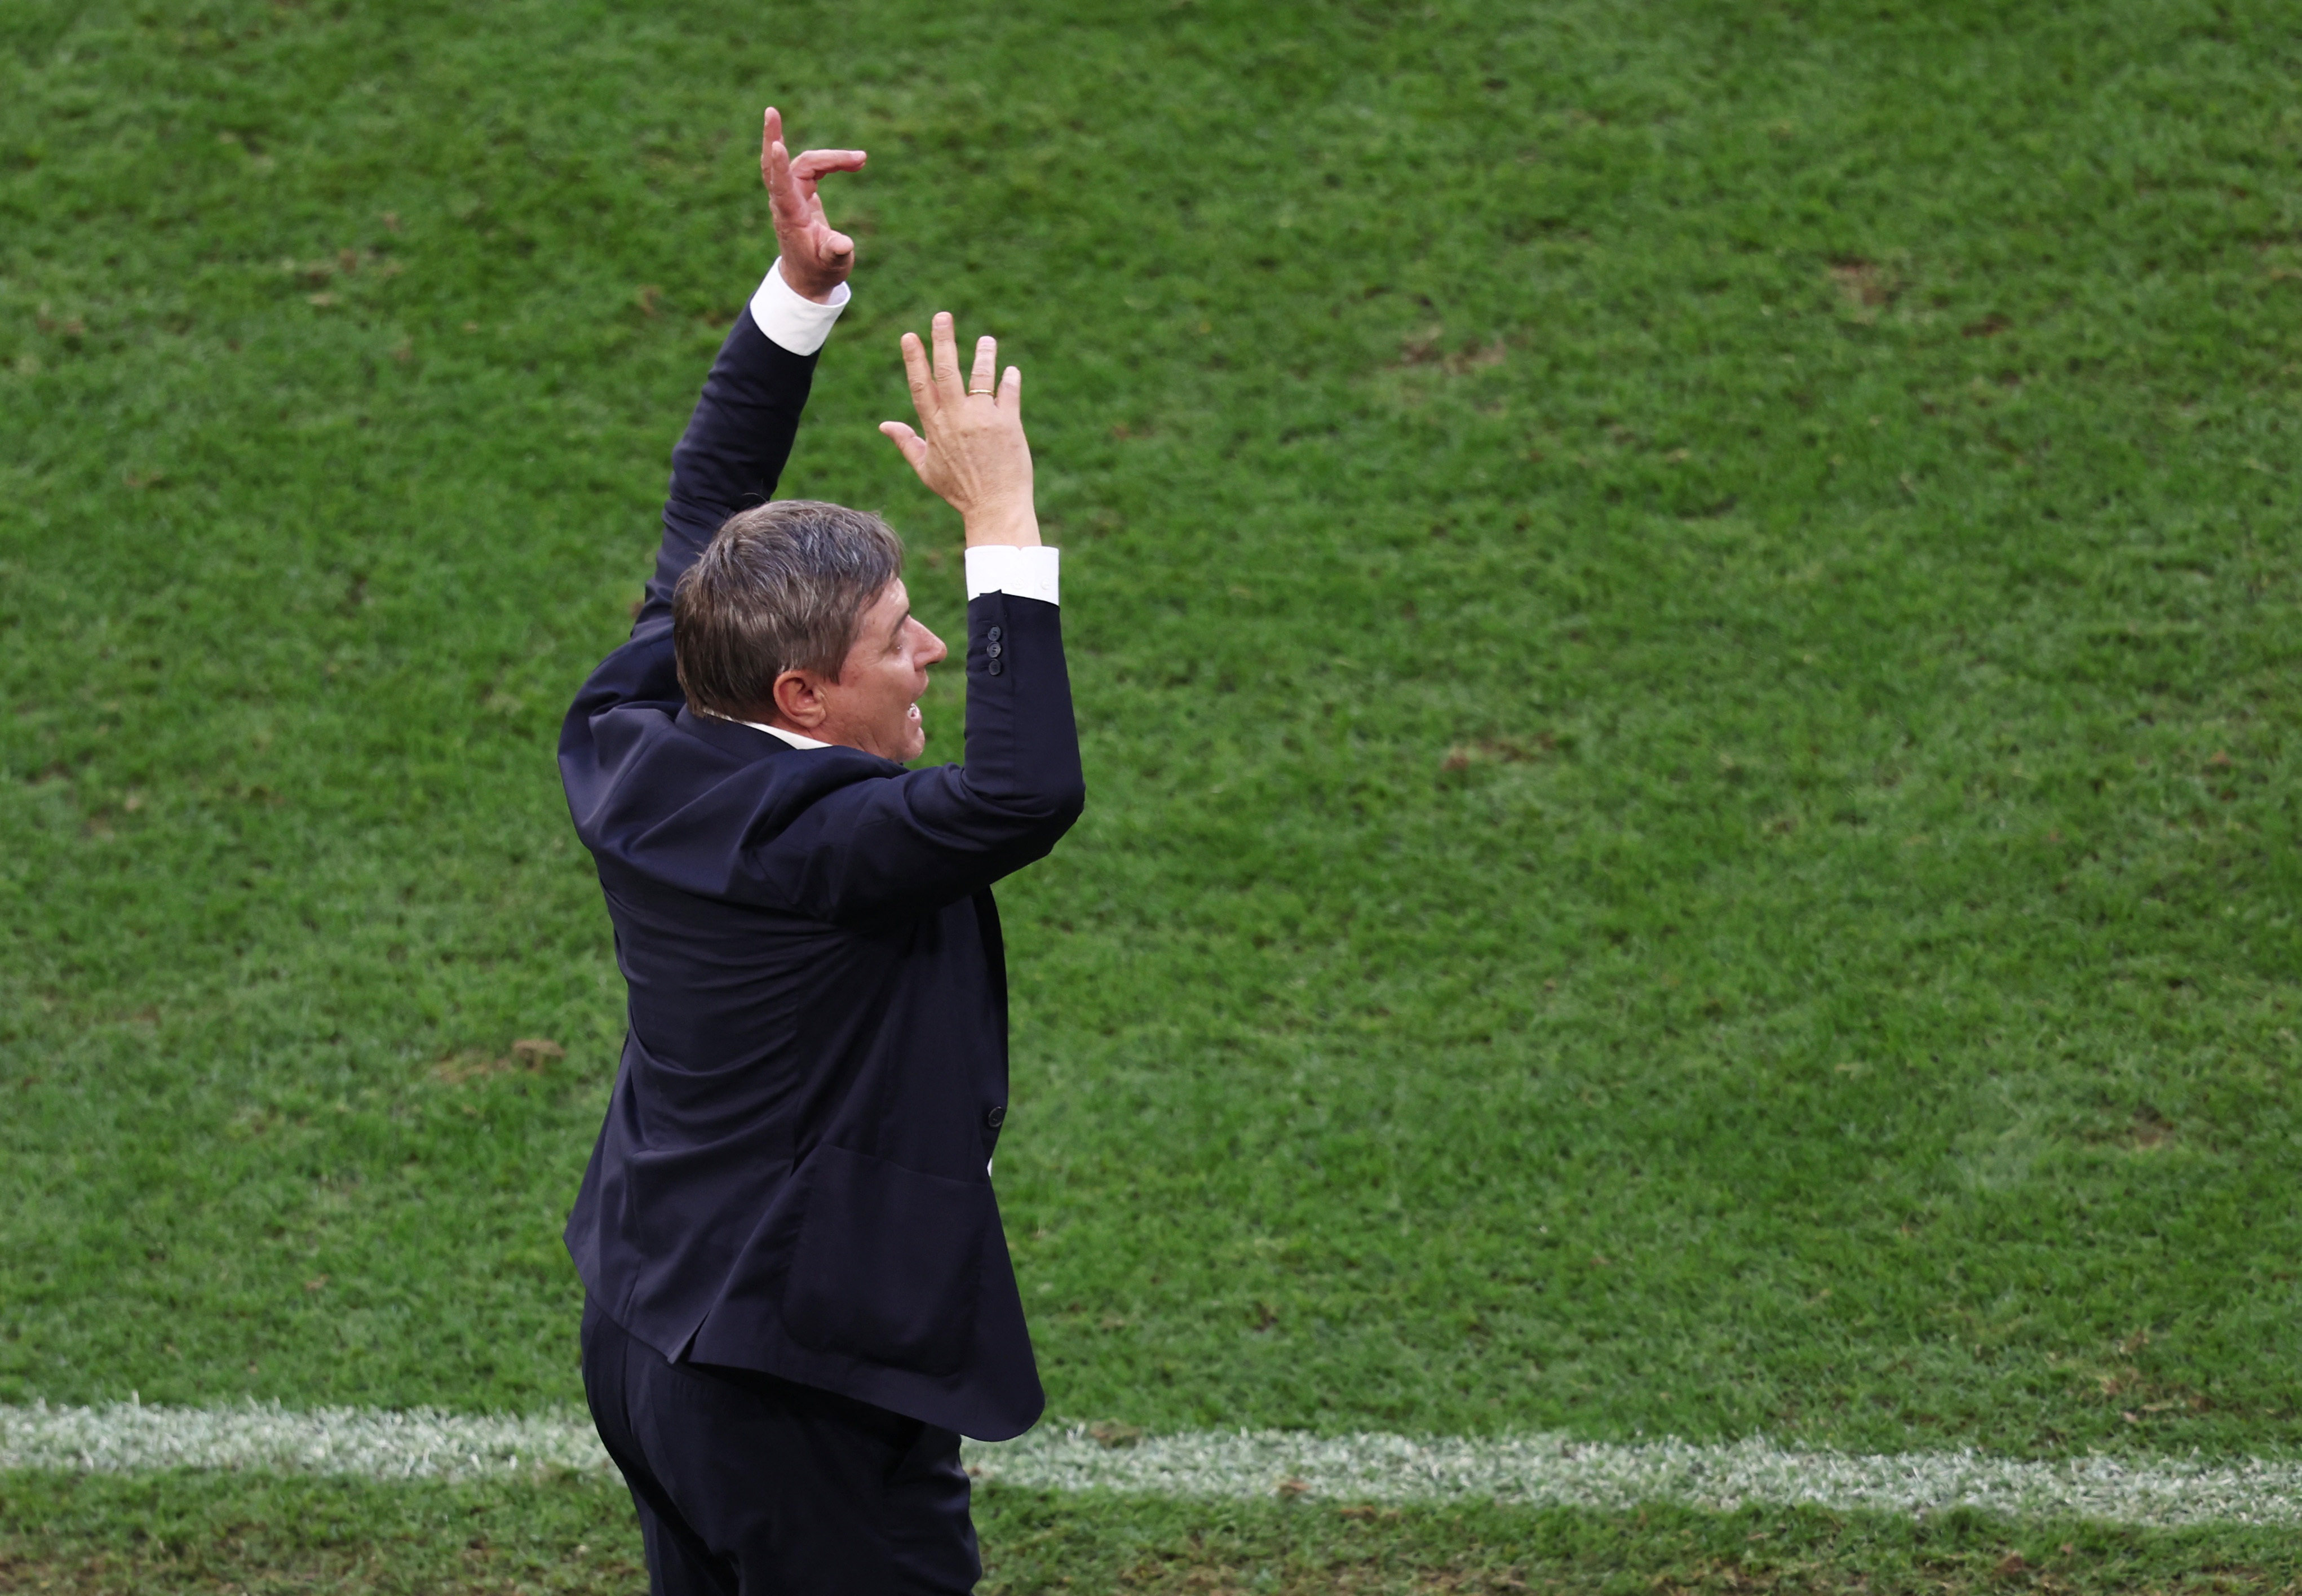 Serbia coach Dragan Stojkovic was less than impressed with his side’s performance. Photo: Reuters